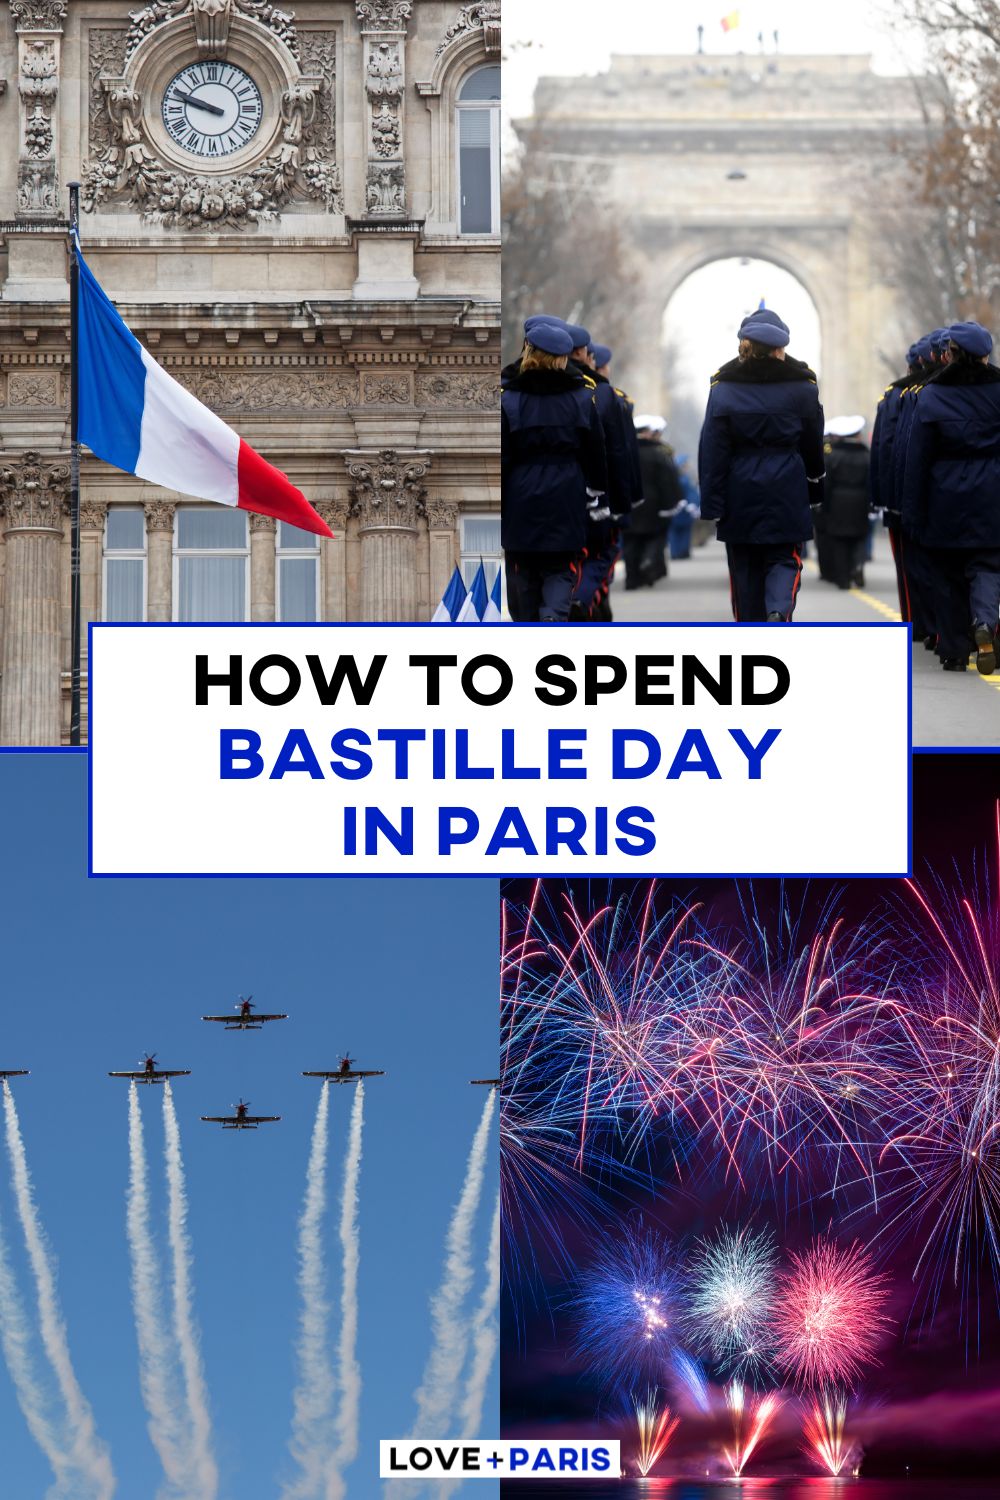 This is a Pinterest image detailing How To Spend Bastille Day in Paris.